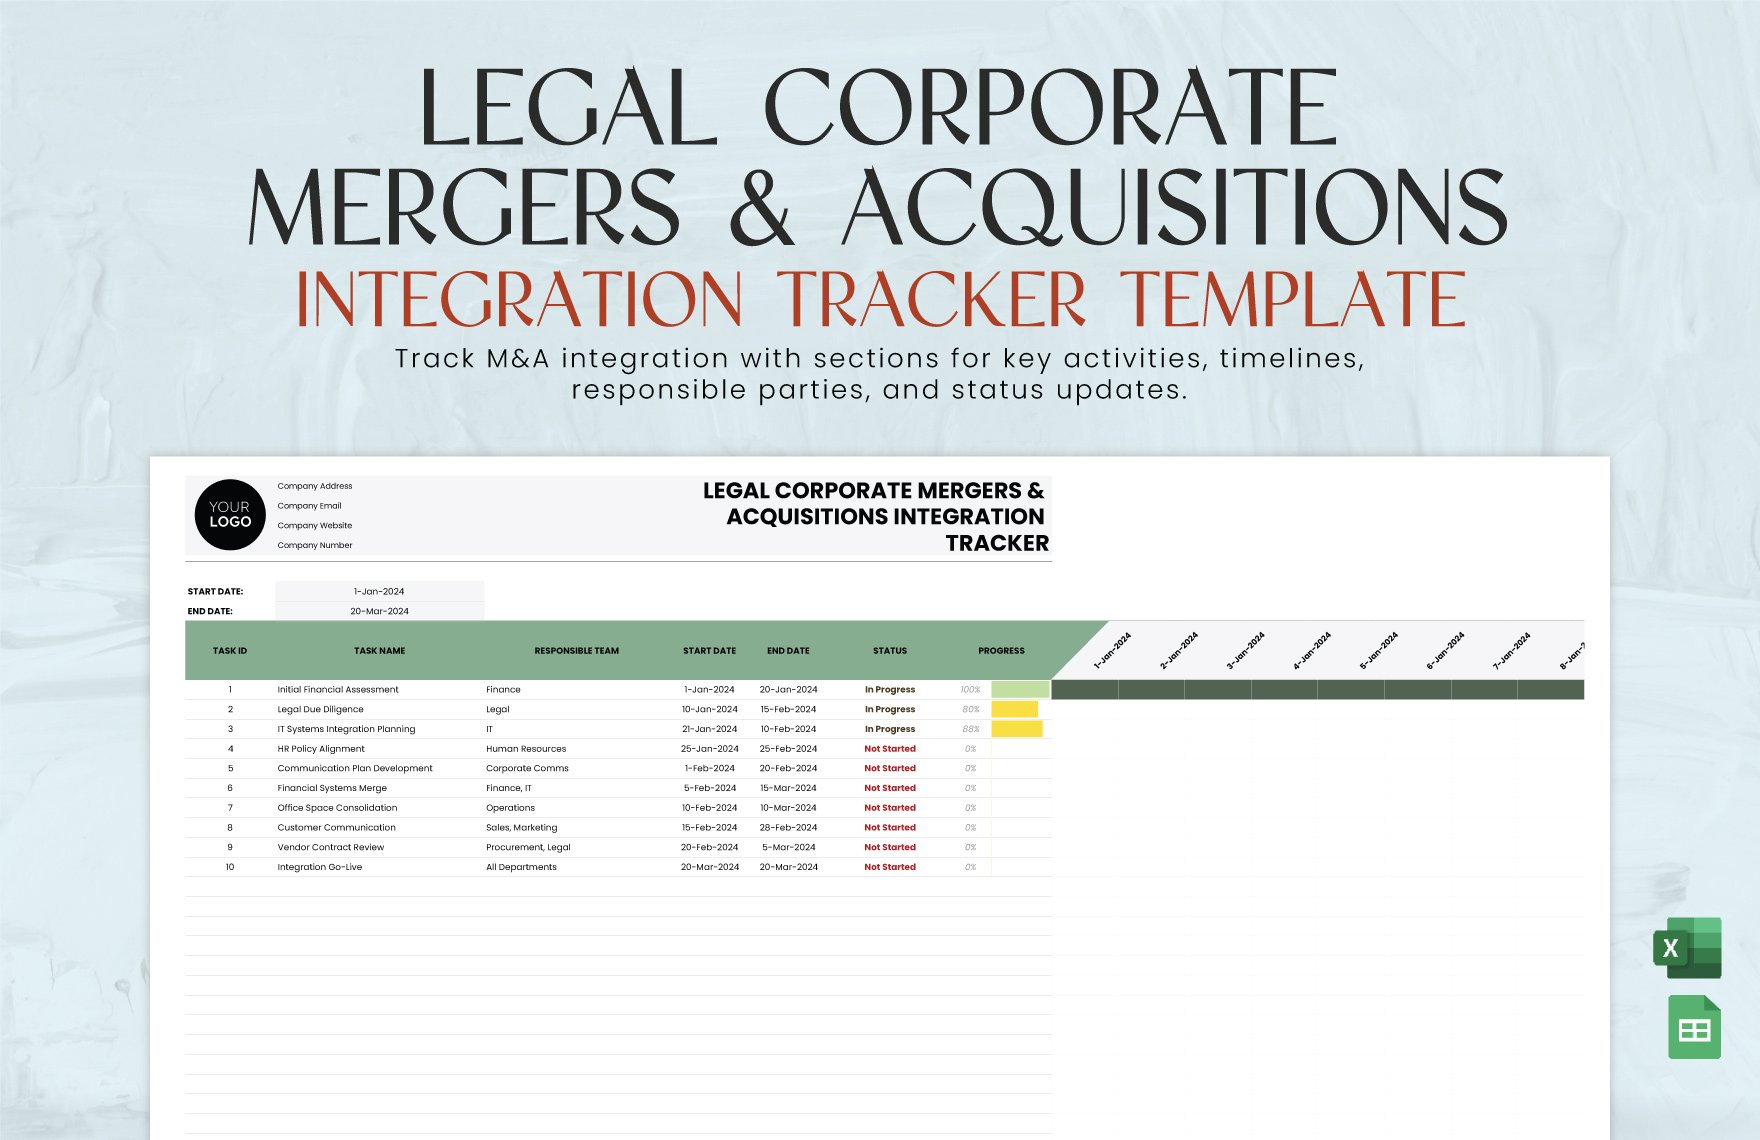 Legal Corporate Mergers & Acquisitions Integration Tracker Template in Excel, Google Sheets